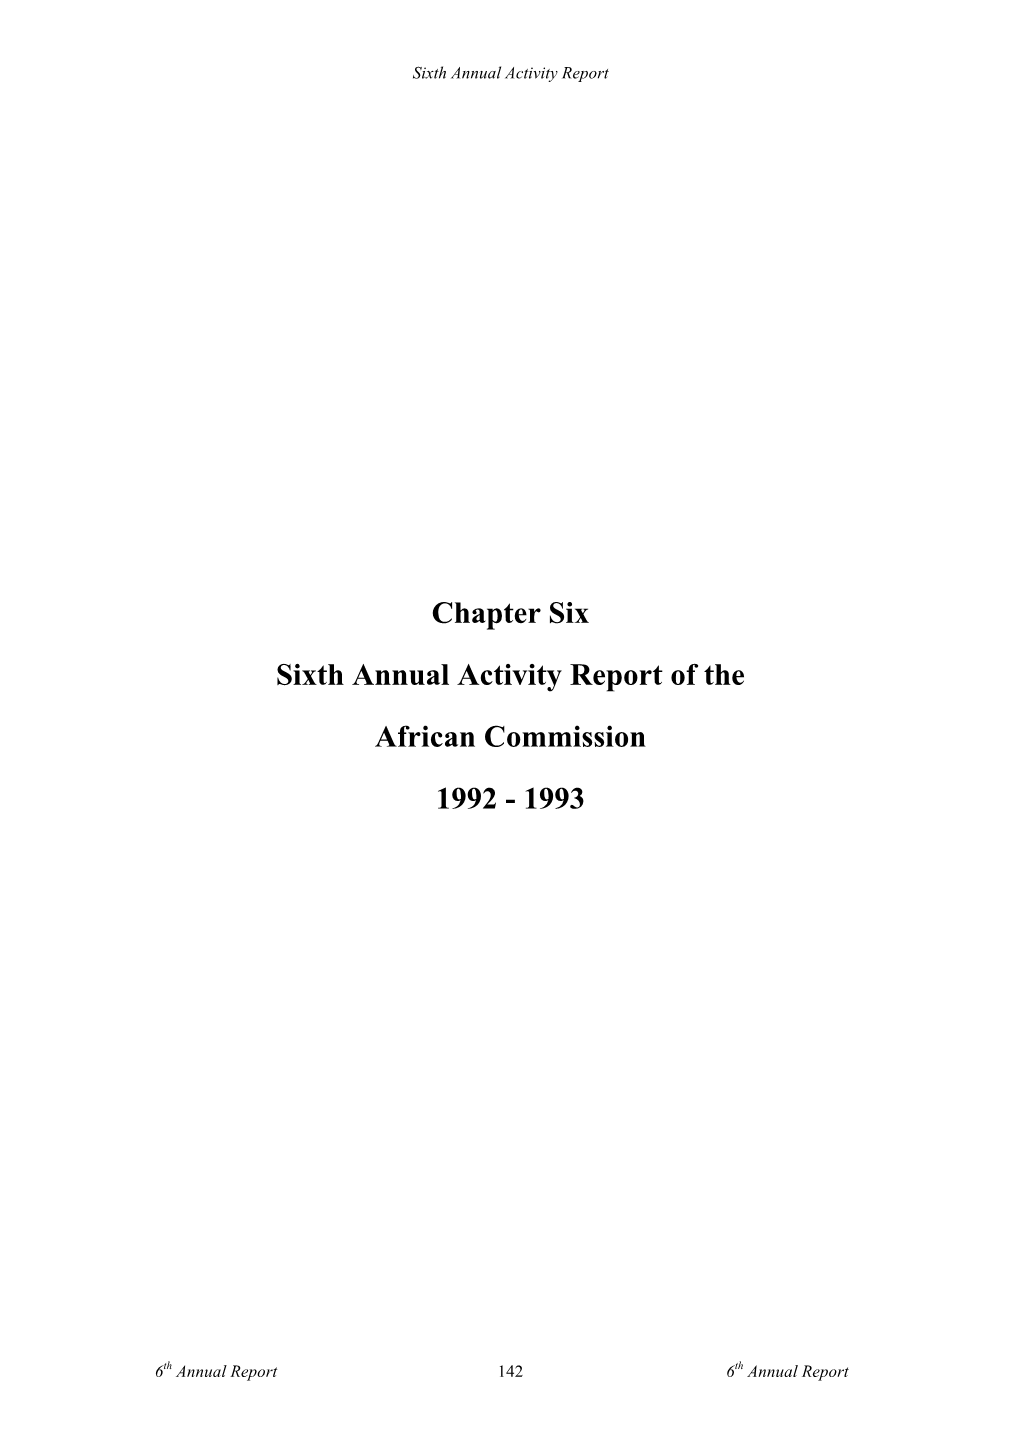 Chapter Six Sixth Annual Activity Report of the African Commission